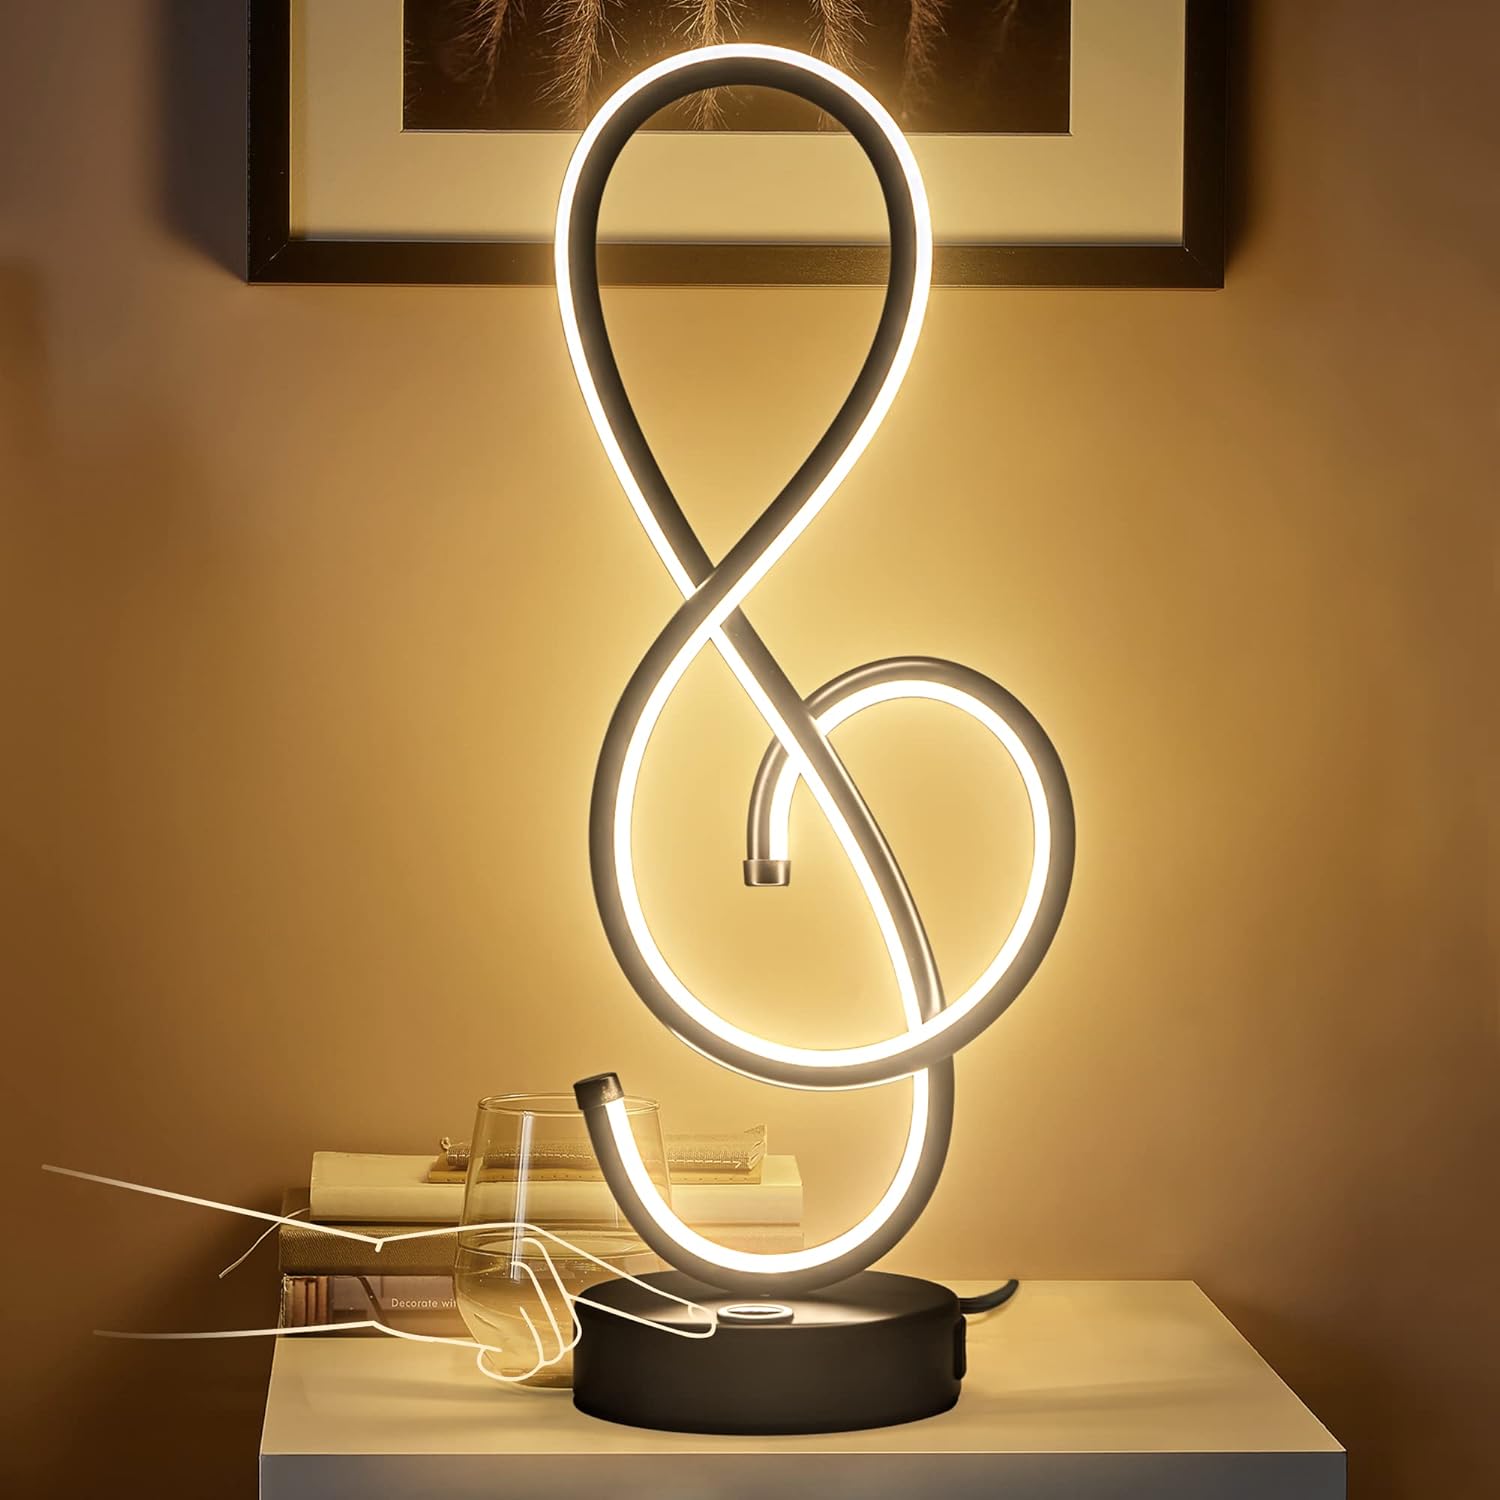 Modern Table Lamp, LED Bedside lamp with USB Port, Touch Stepless Dimmable Nightstand lamp, Unique Musical Note lamp for Bedroom Living Room Home Office, Spiral lamp for Ideal Gift, 14W, Black.